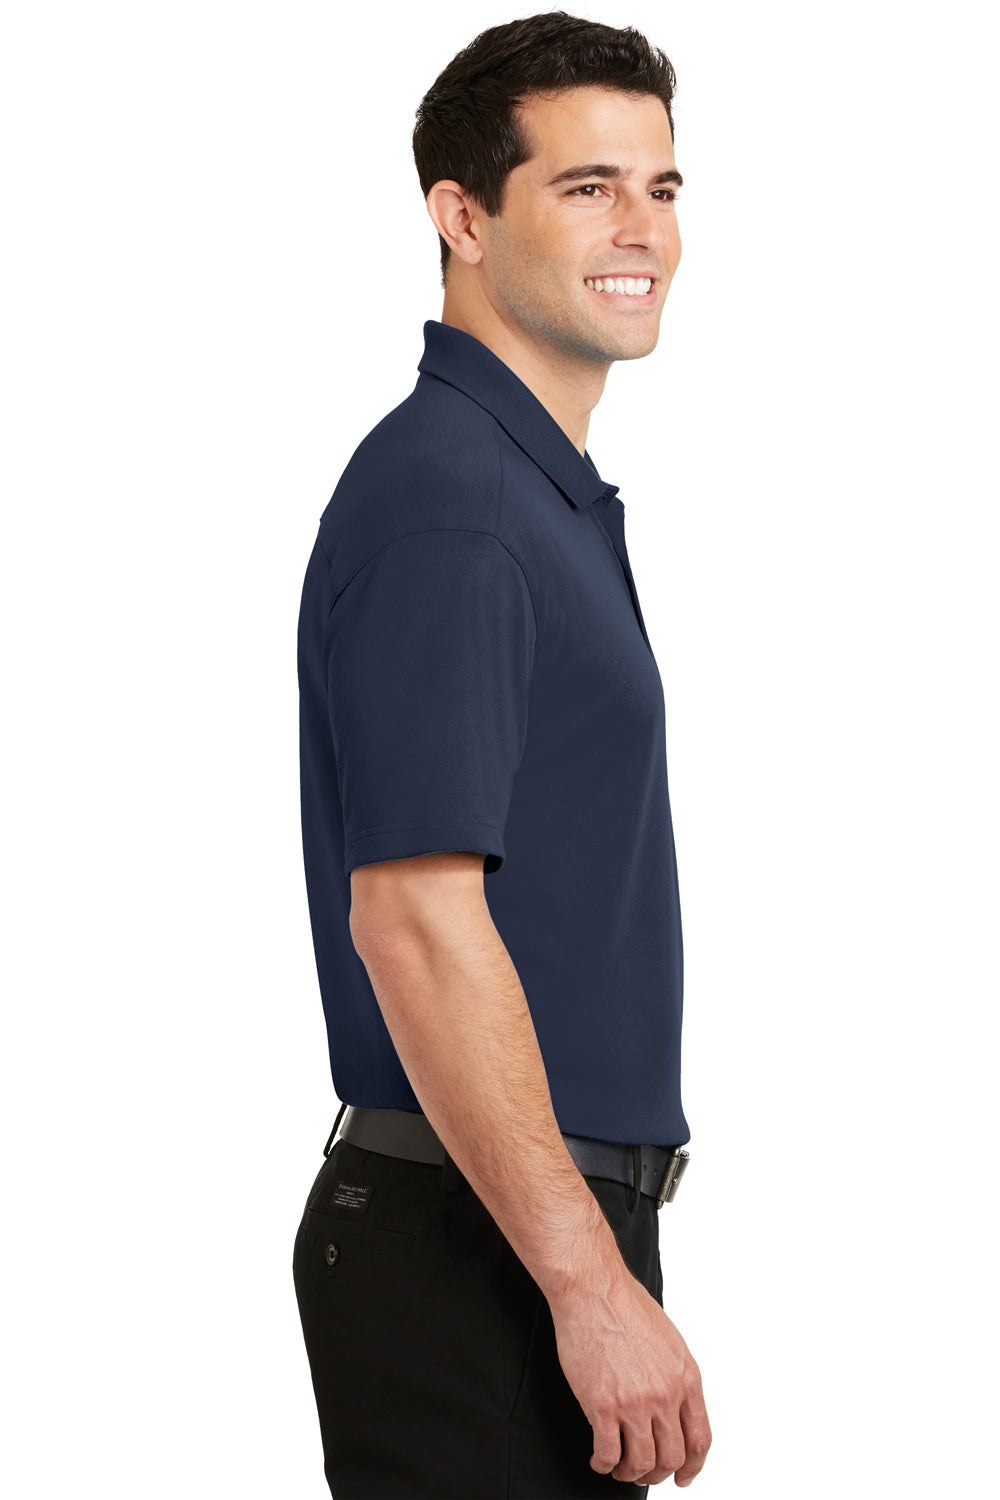 Port Authority K5200 Mens Silk Touch Performance Moisture Wicking Short Sleeve Polo Shirt Navy Blue Side